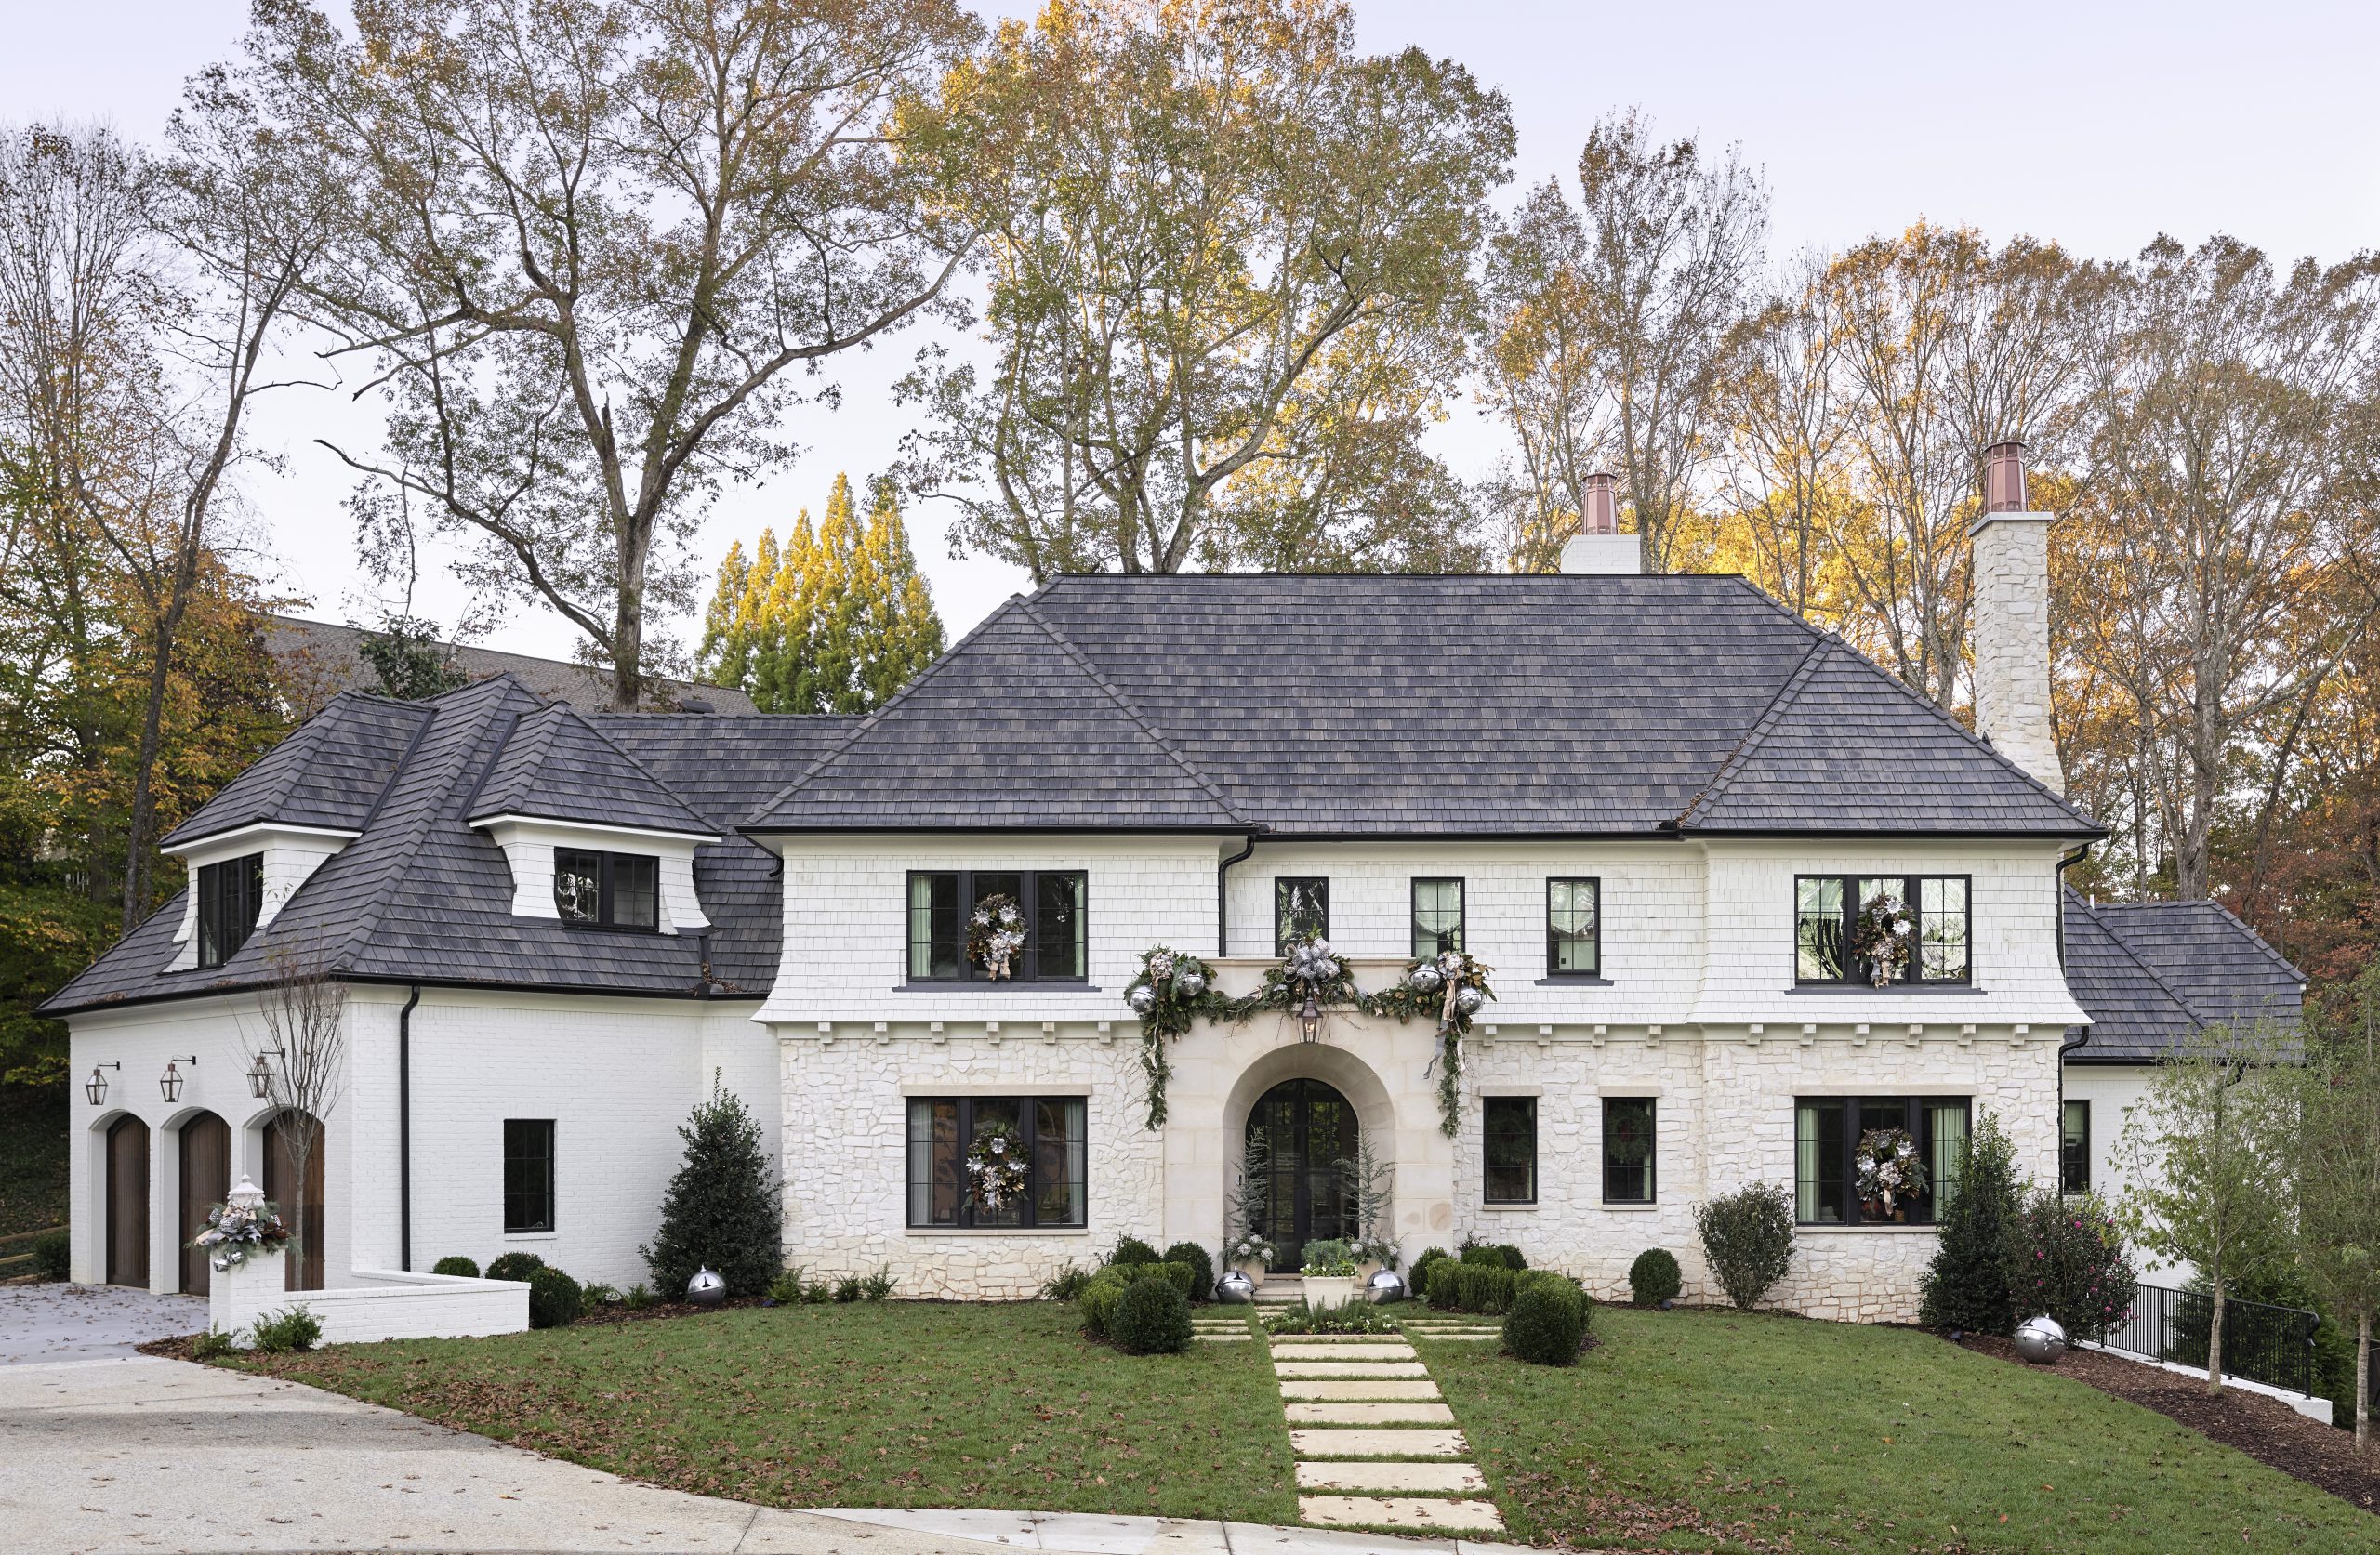 Atlanta Homes & Lifestyles Presents 2020 Home For The Holidays Showhouse